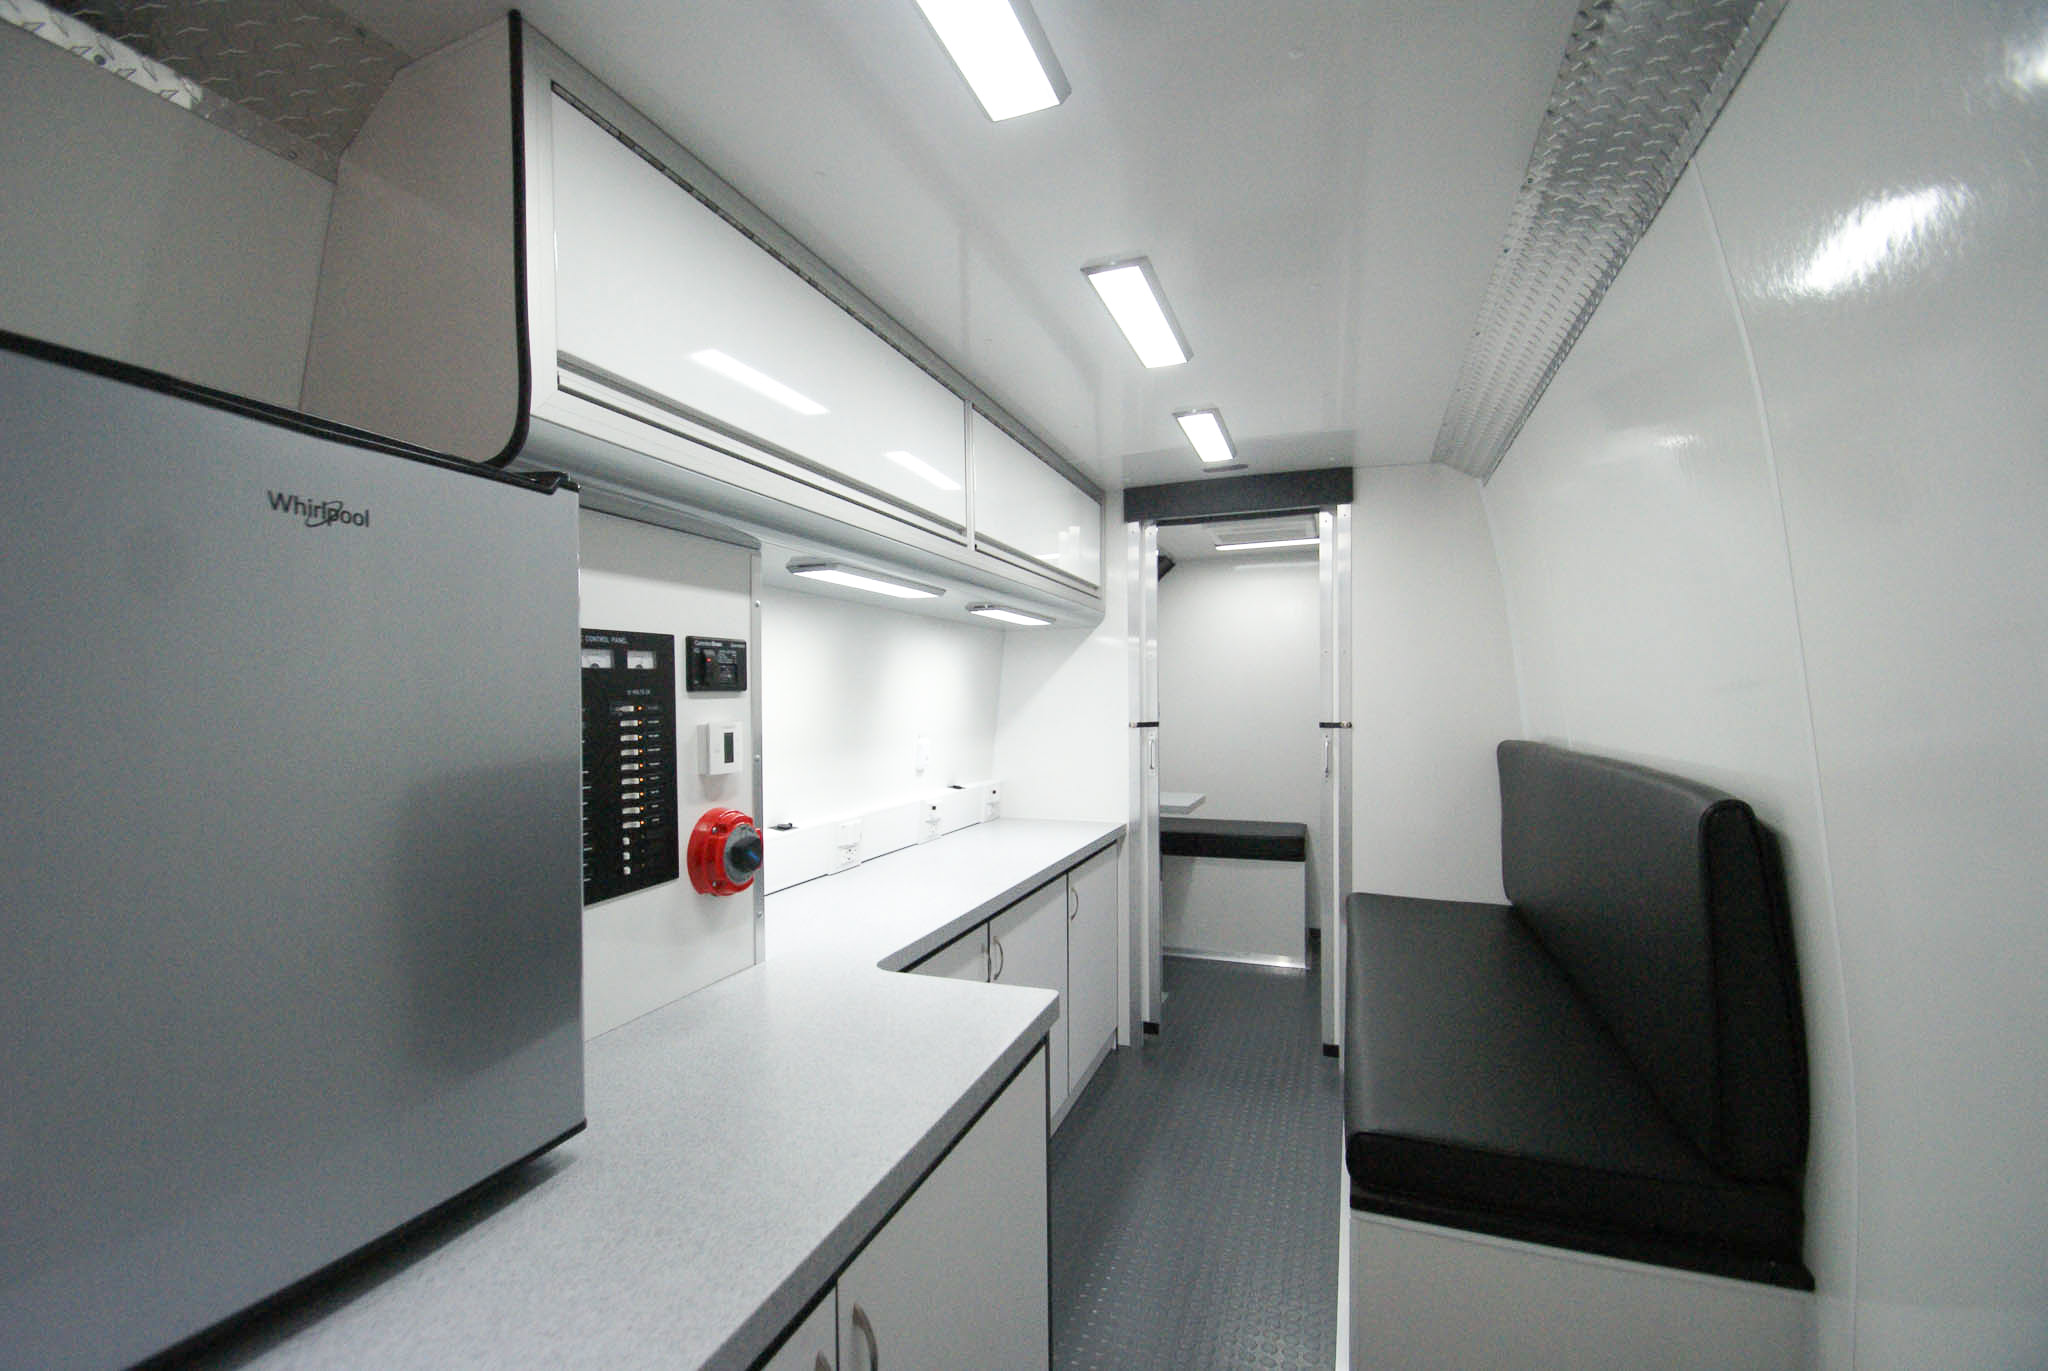 An angled view of the Mobile Outreach sprinter van's back room that also features the refrigerator, electric control panel, and overhead cabinets. Through the open doors, you can see the waiting area.